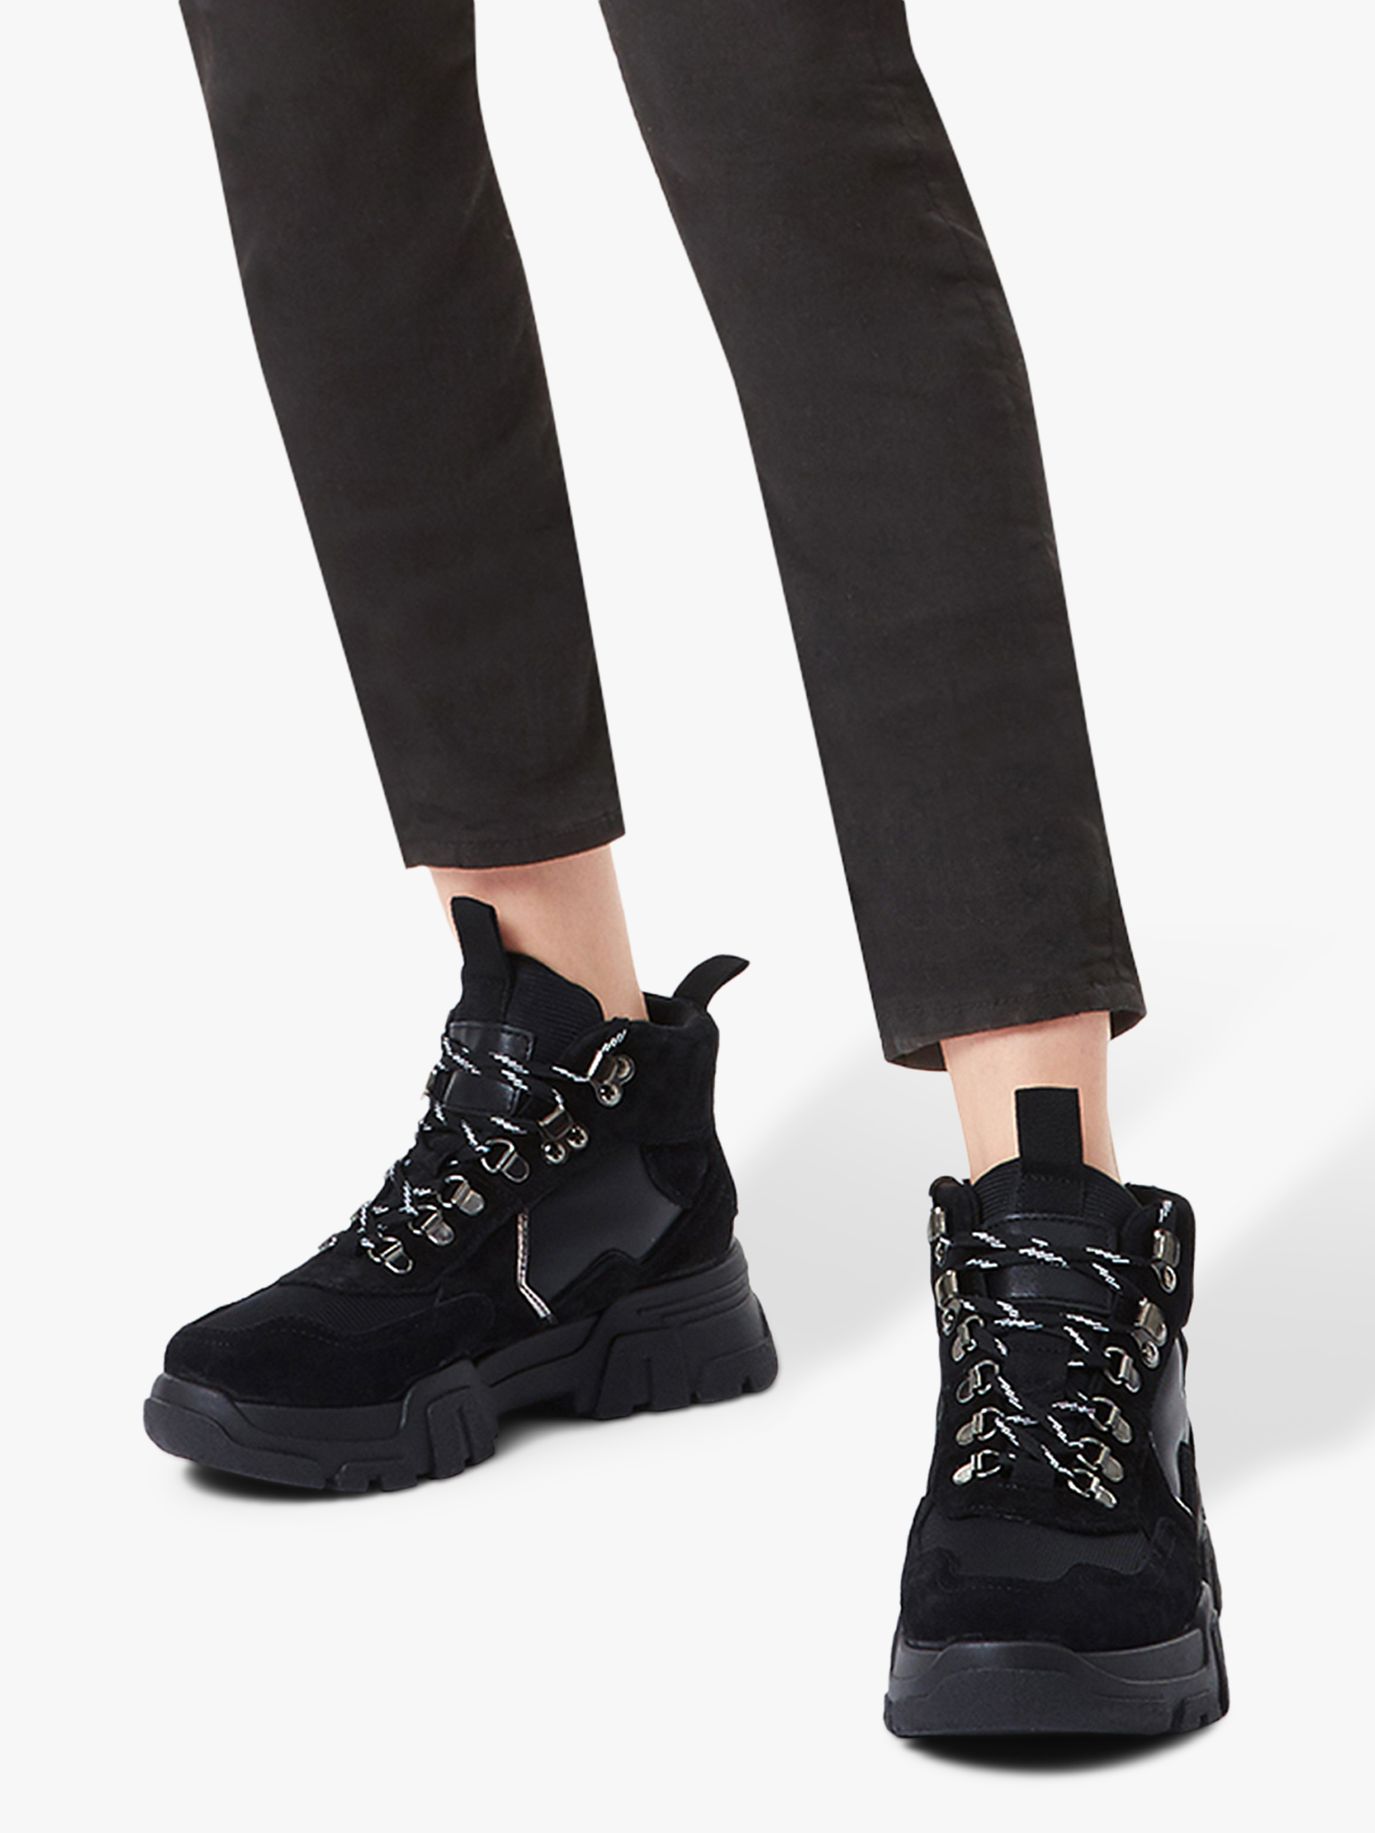 Carvela Loopy High Top Trainers, Black 